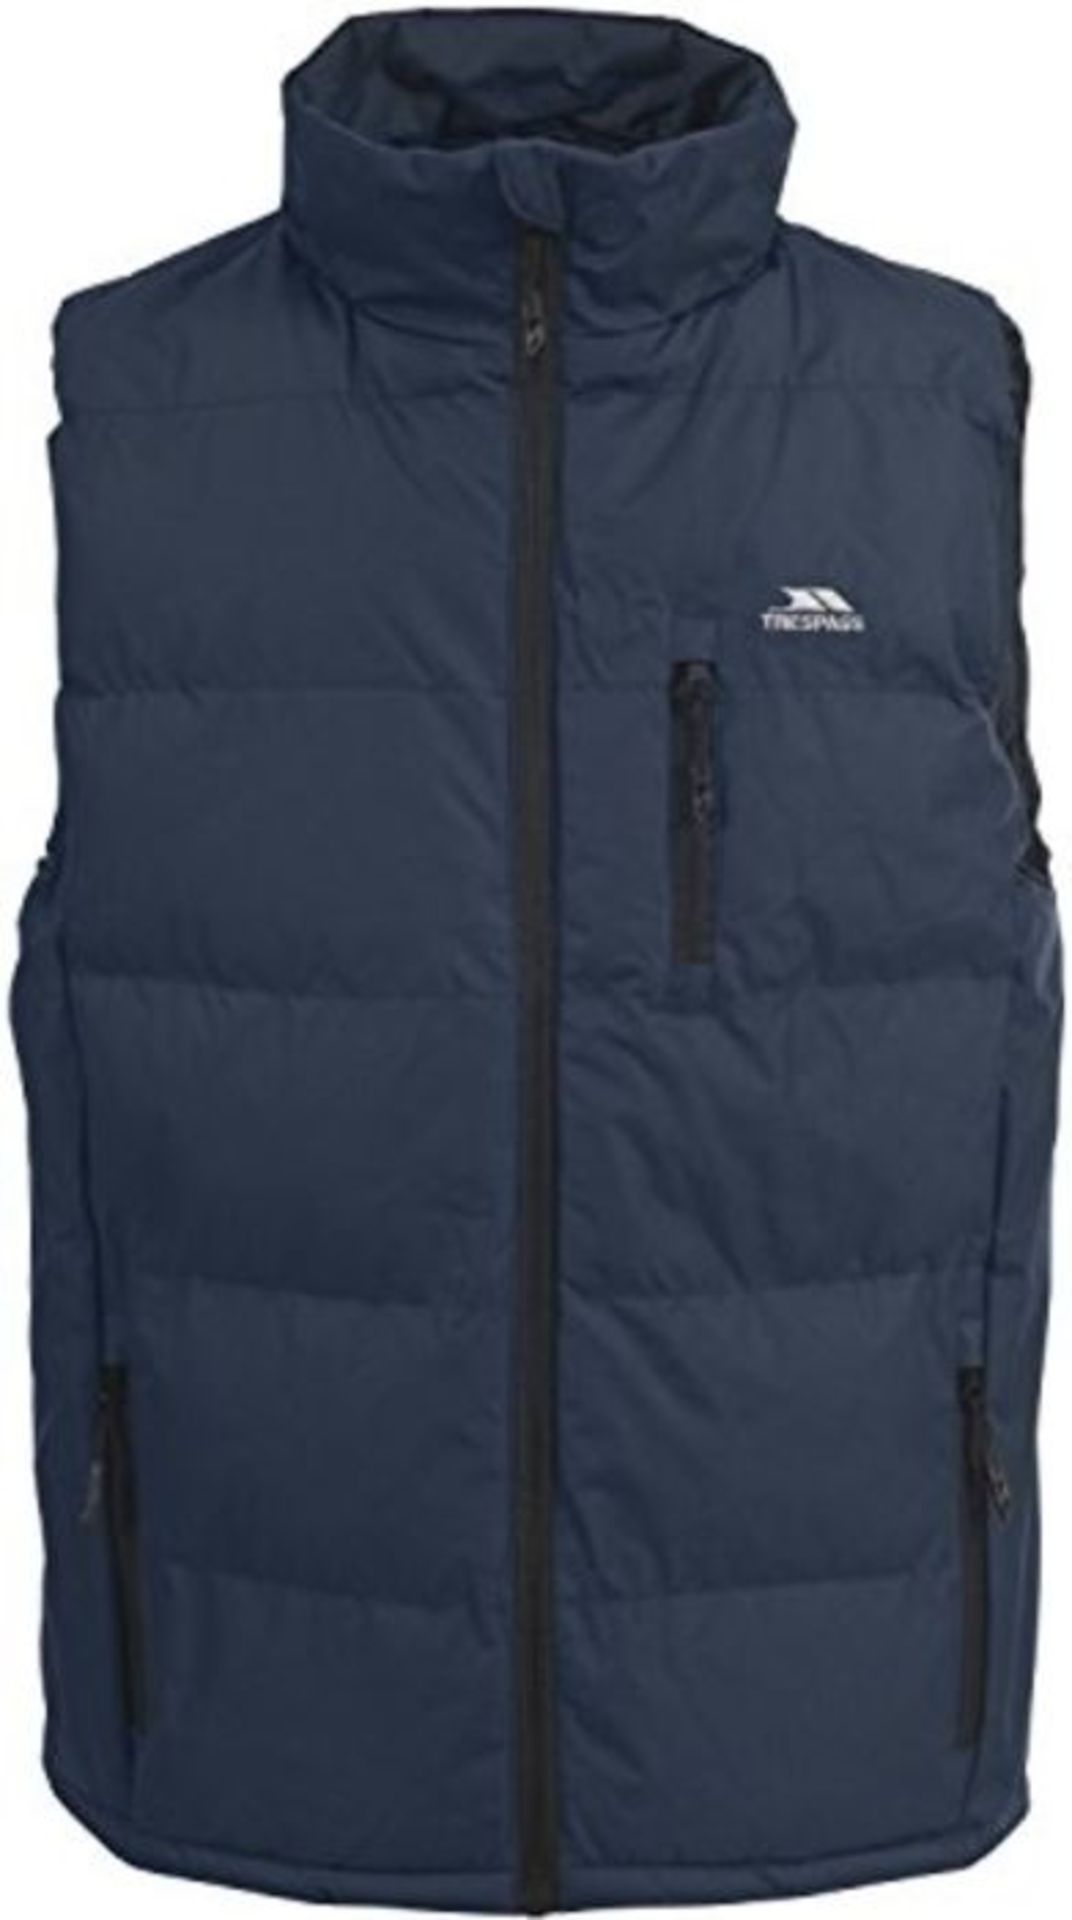 Mens Padded Gilet Bodywarmer with 3 Zip Pockets & Inner Storm Flap Clasp - Navy M